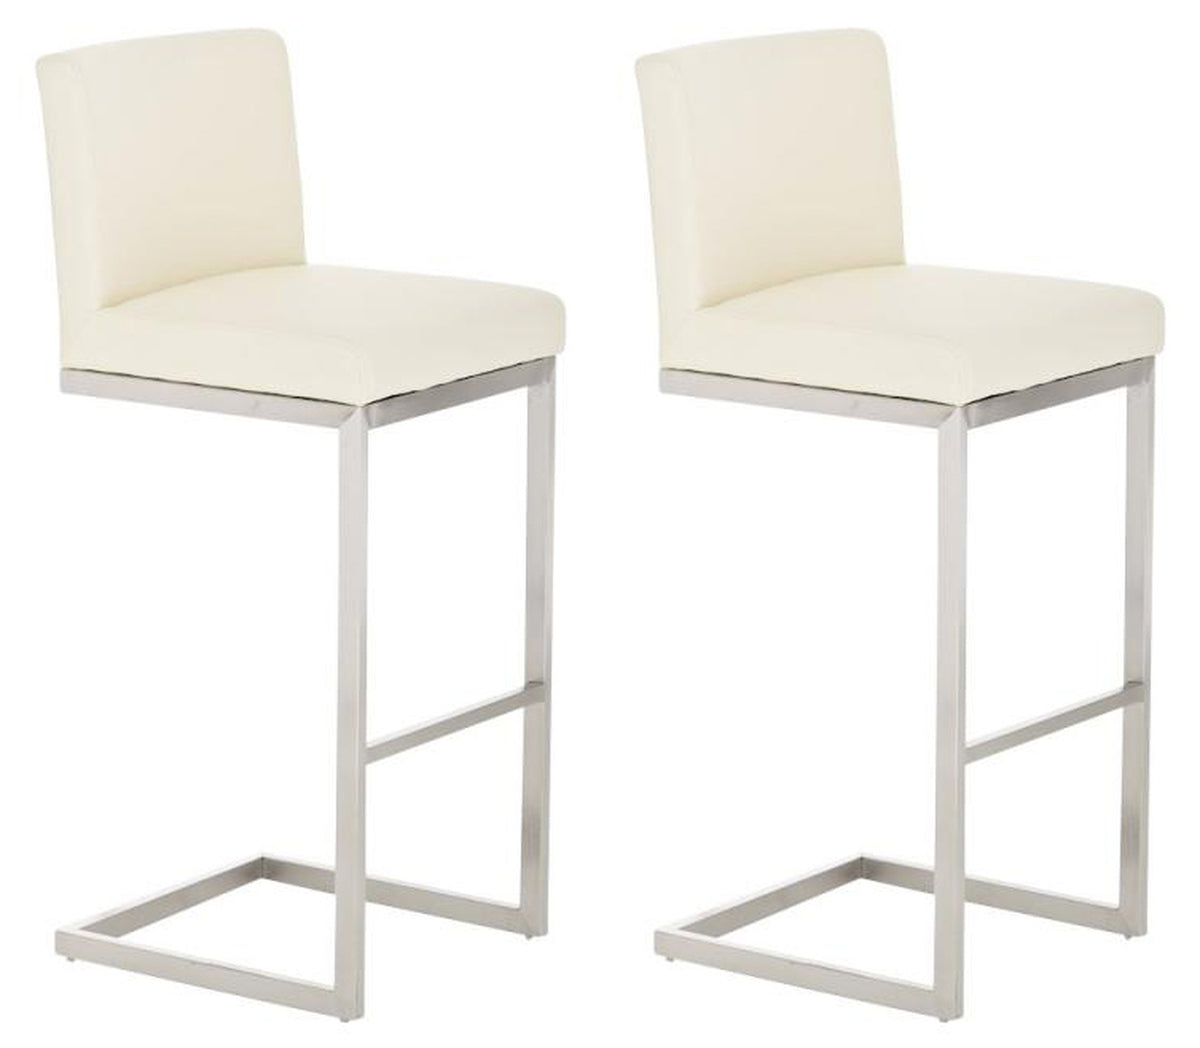 TPFLiving Set of 2 bar stools Paragon frame stainless steel faux leather